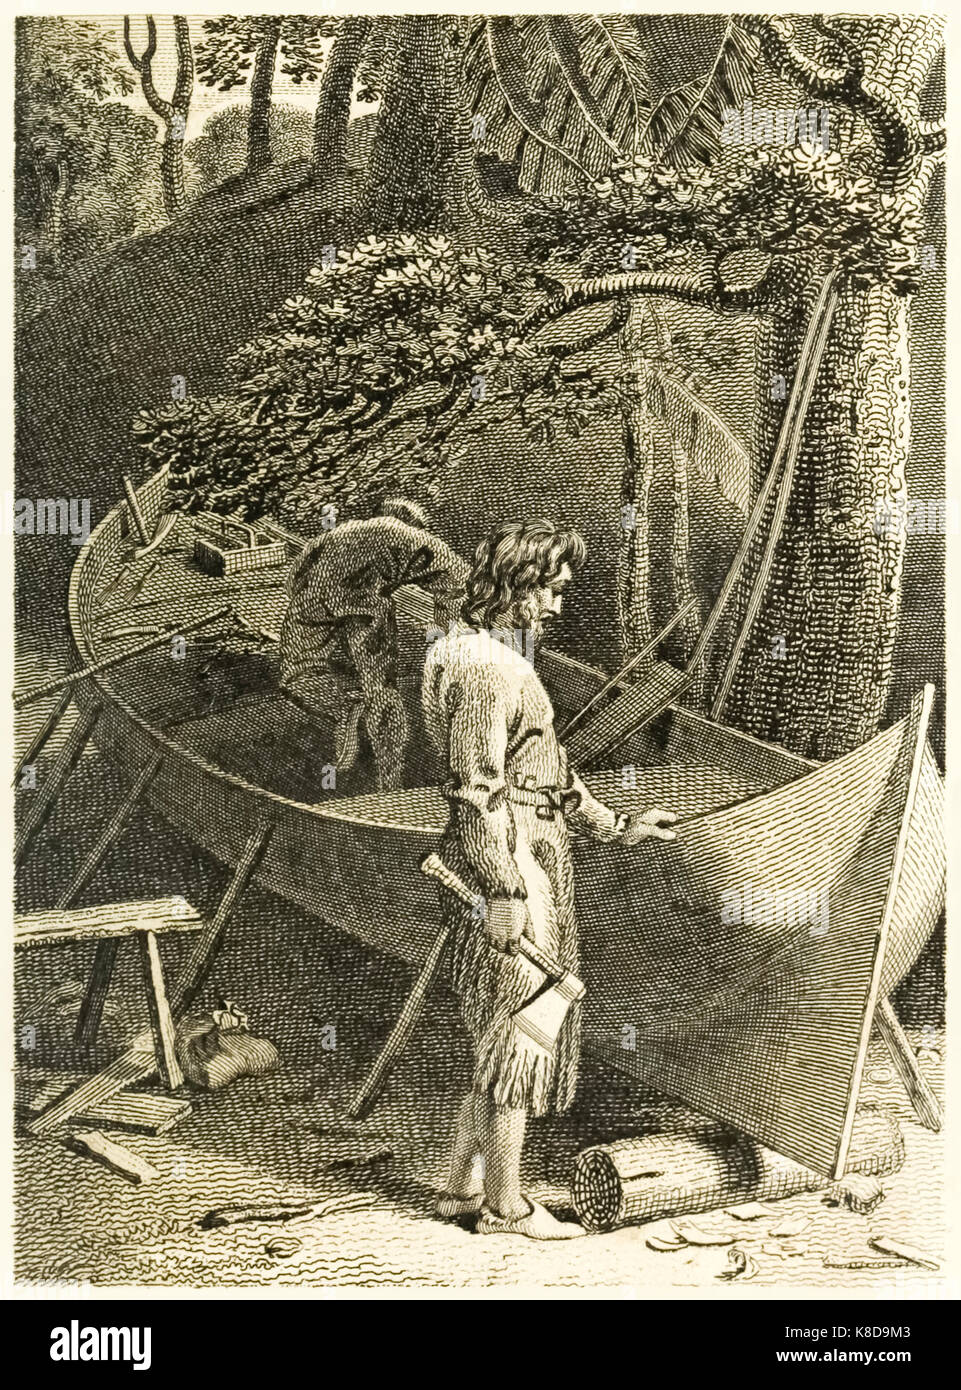 ‘Robinson Crusoe and Friday making a Boat’ from “The Life and Strange Surprising Adventures of Robinson Crusoe, or York, Mariner” by Daniel Defoe (1660-1731). Illustration by Thomas Stothard (1755-1834) engraving by Thomas Medland (1765-1833). See more information below Stock Photo